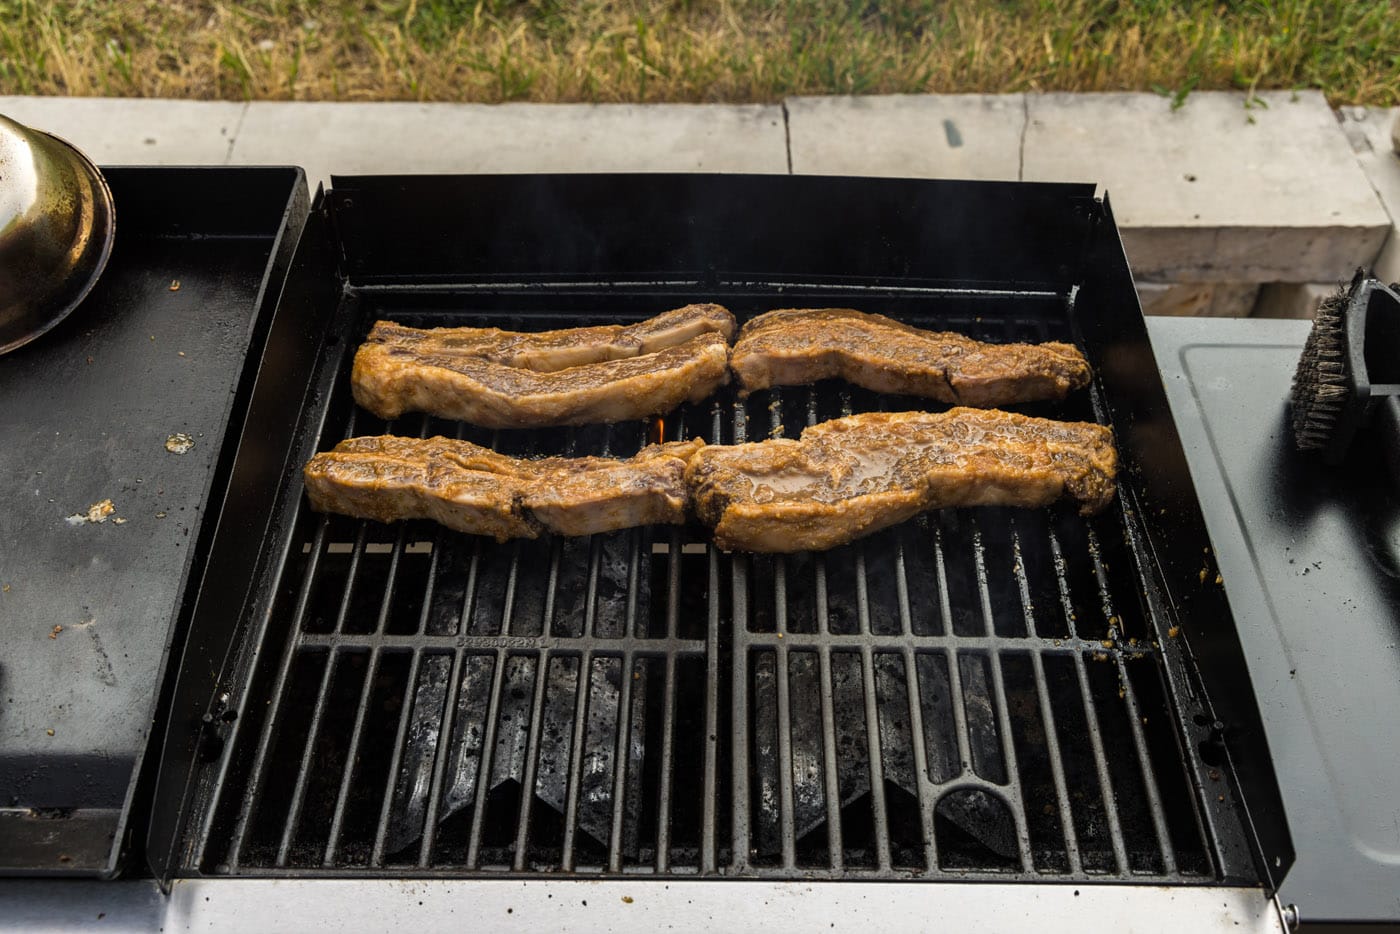 Korean barbecue short ribs on the grill